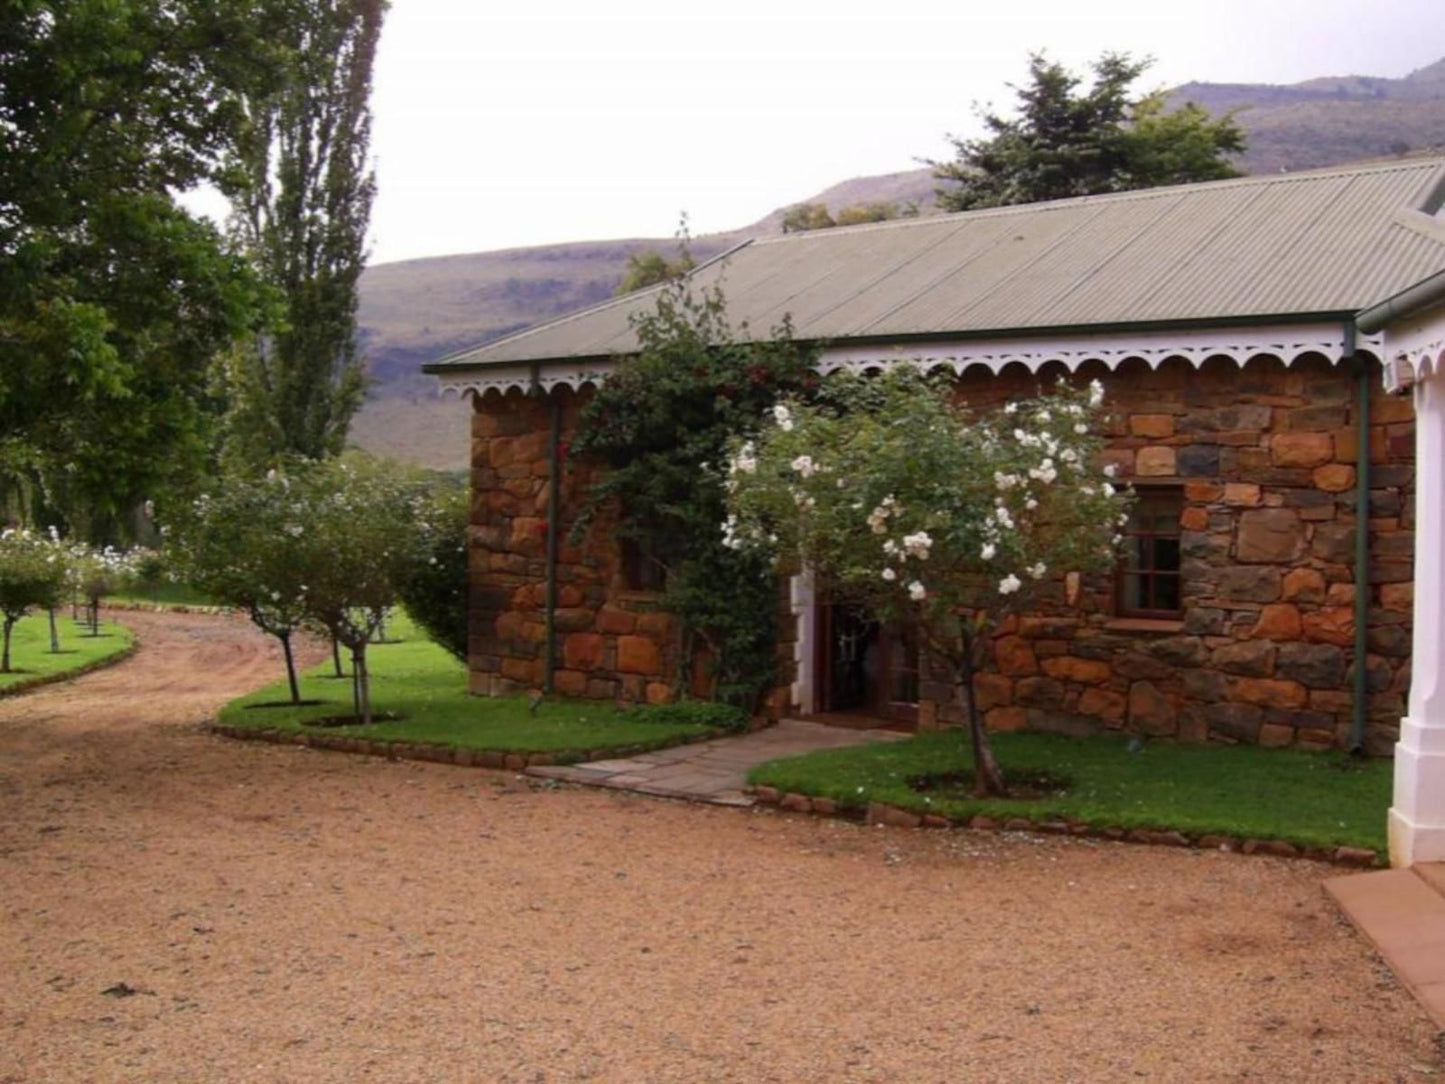 Nooitgedacht Trout Lodge Lydenburg Mpumalanga South Africa Cabin, Building, Architecture